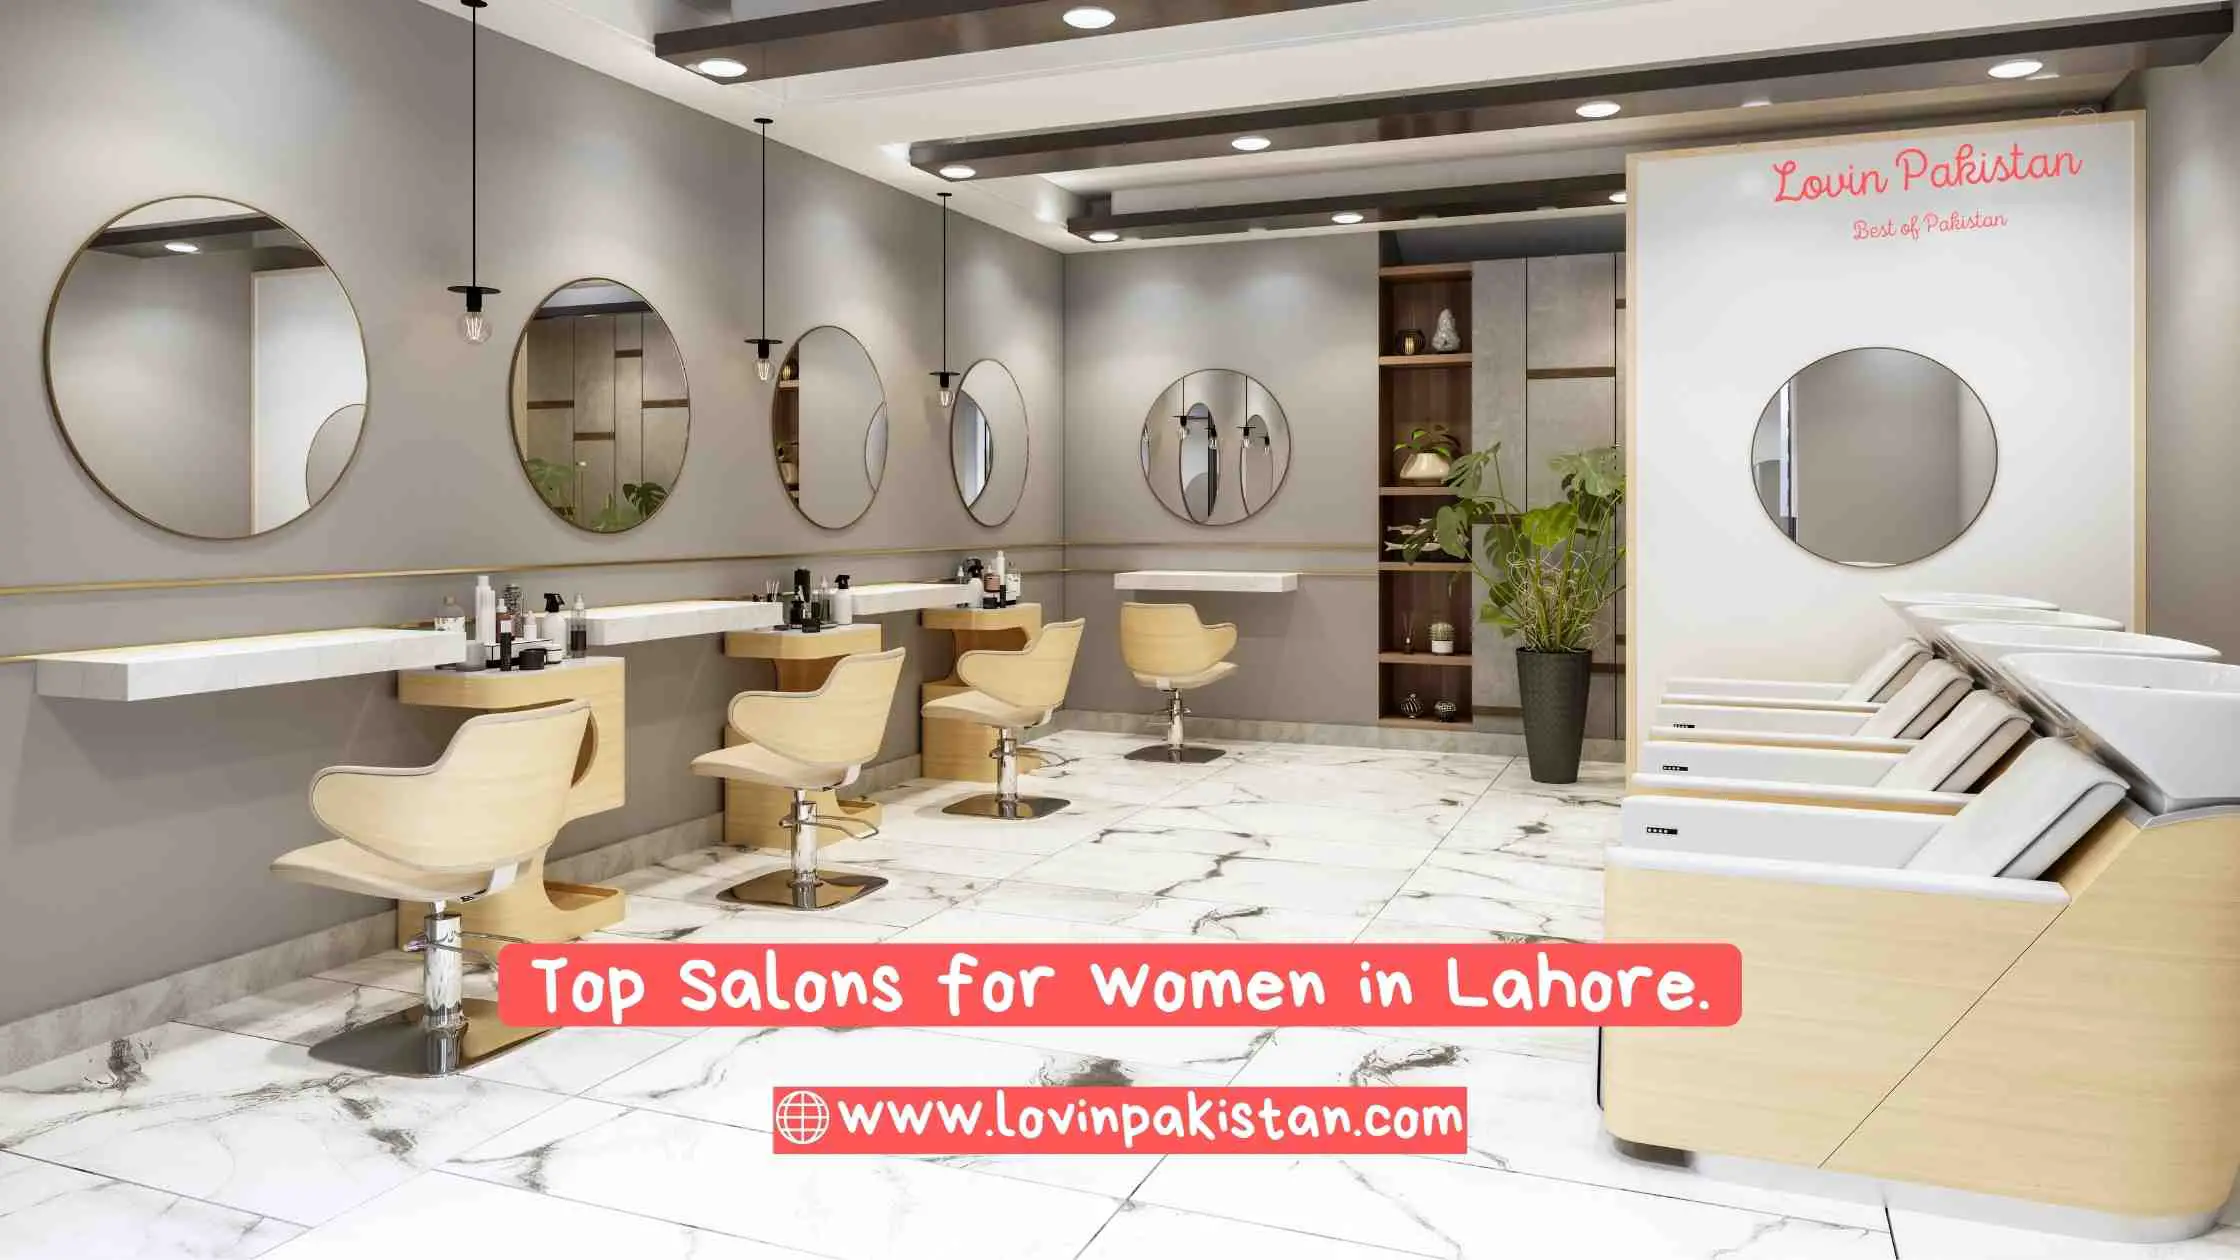 Top Salons for women in Lahore